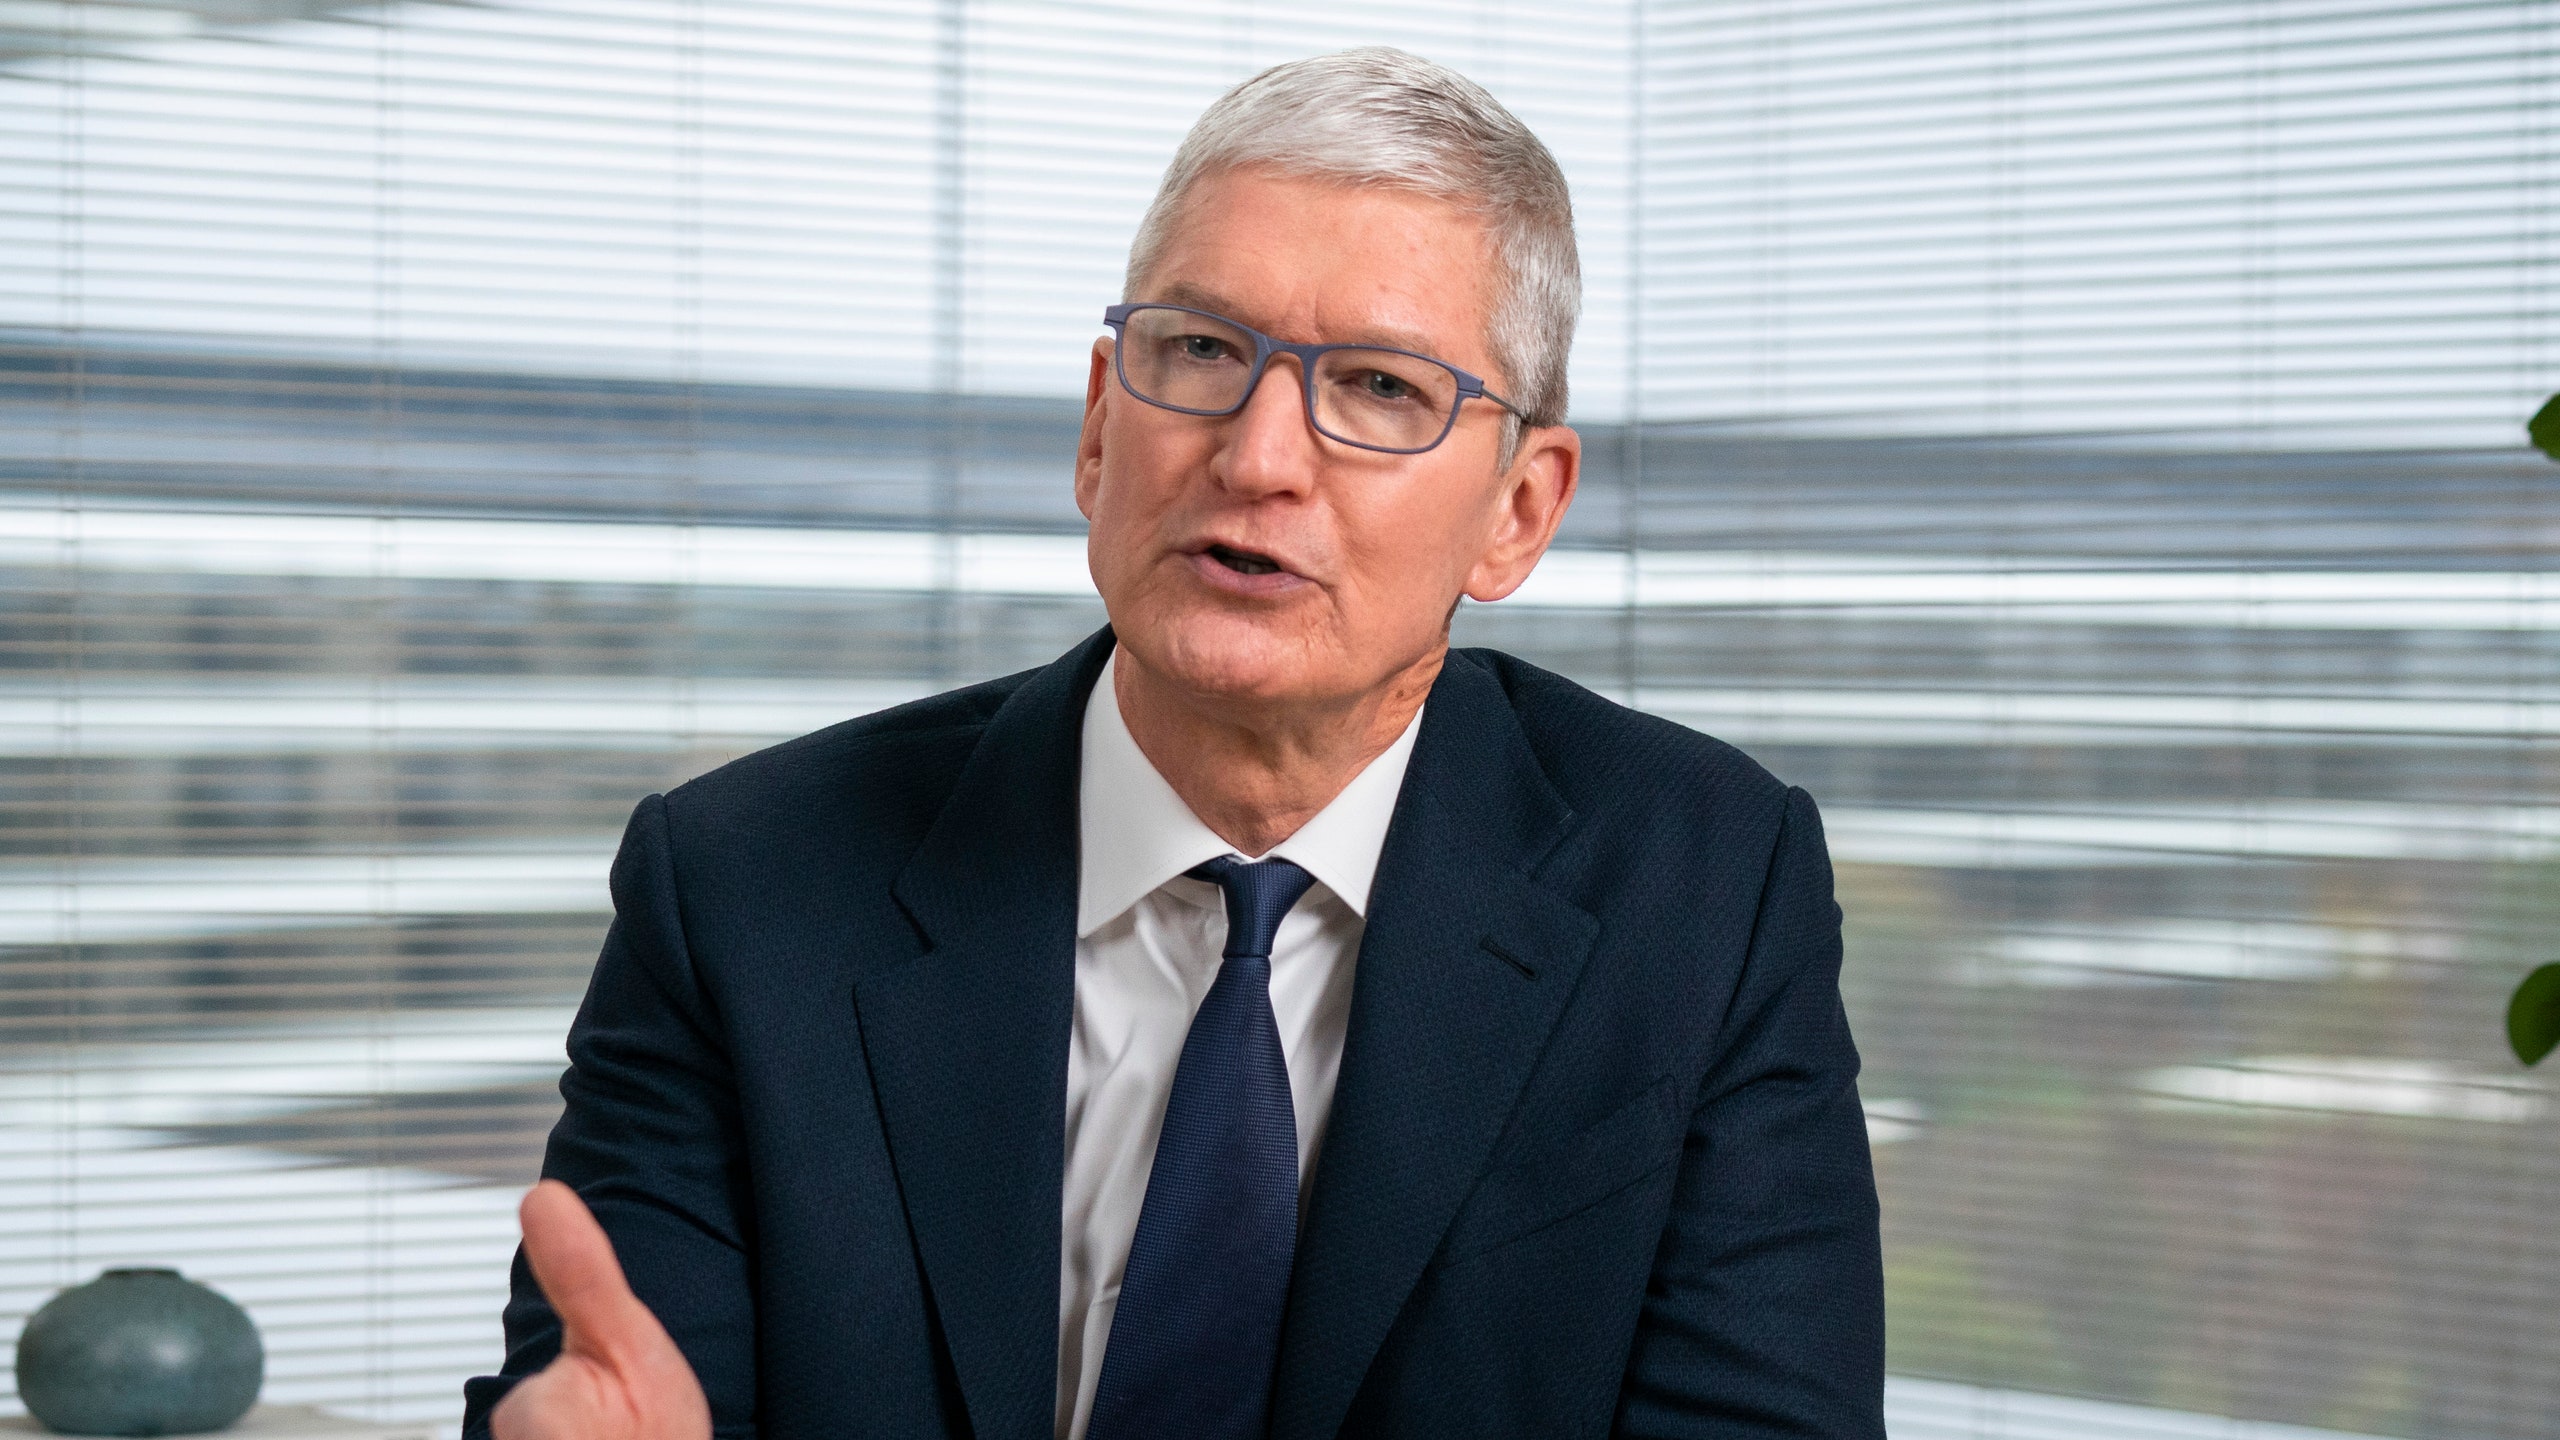 Tim Cook Images Wallpapers